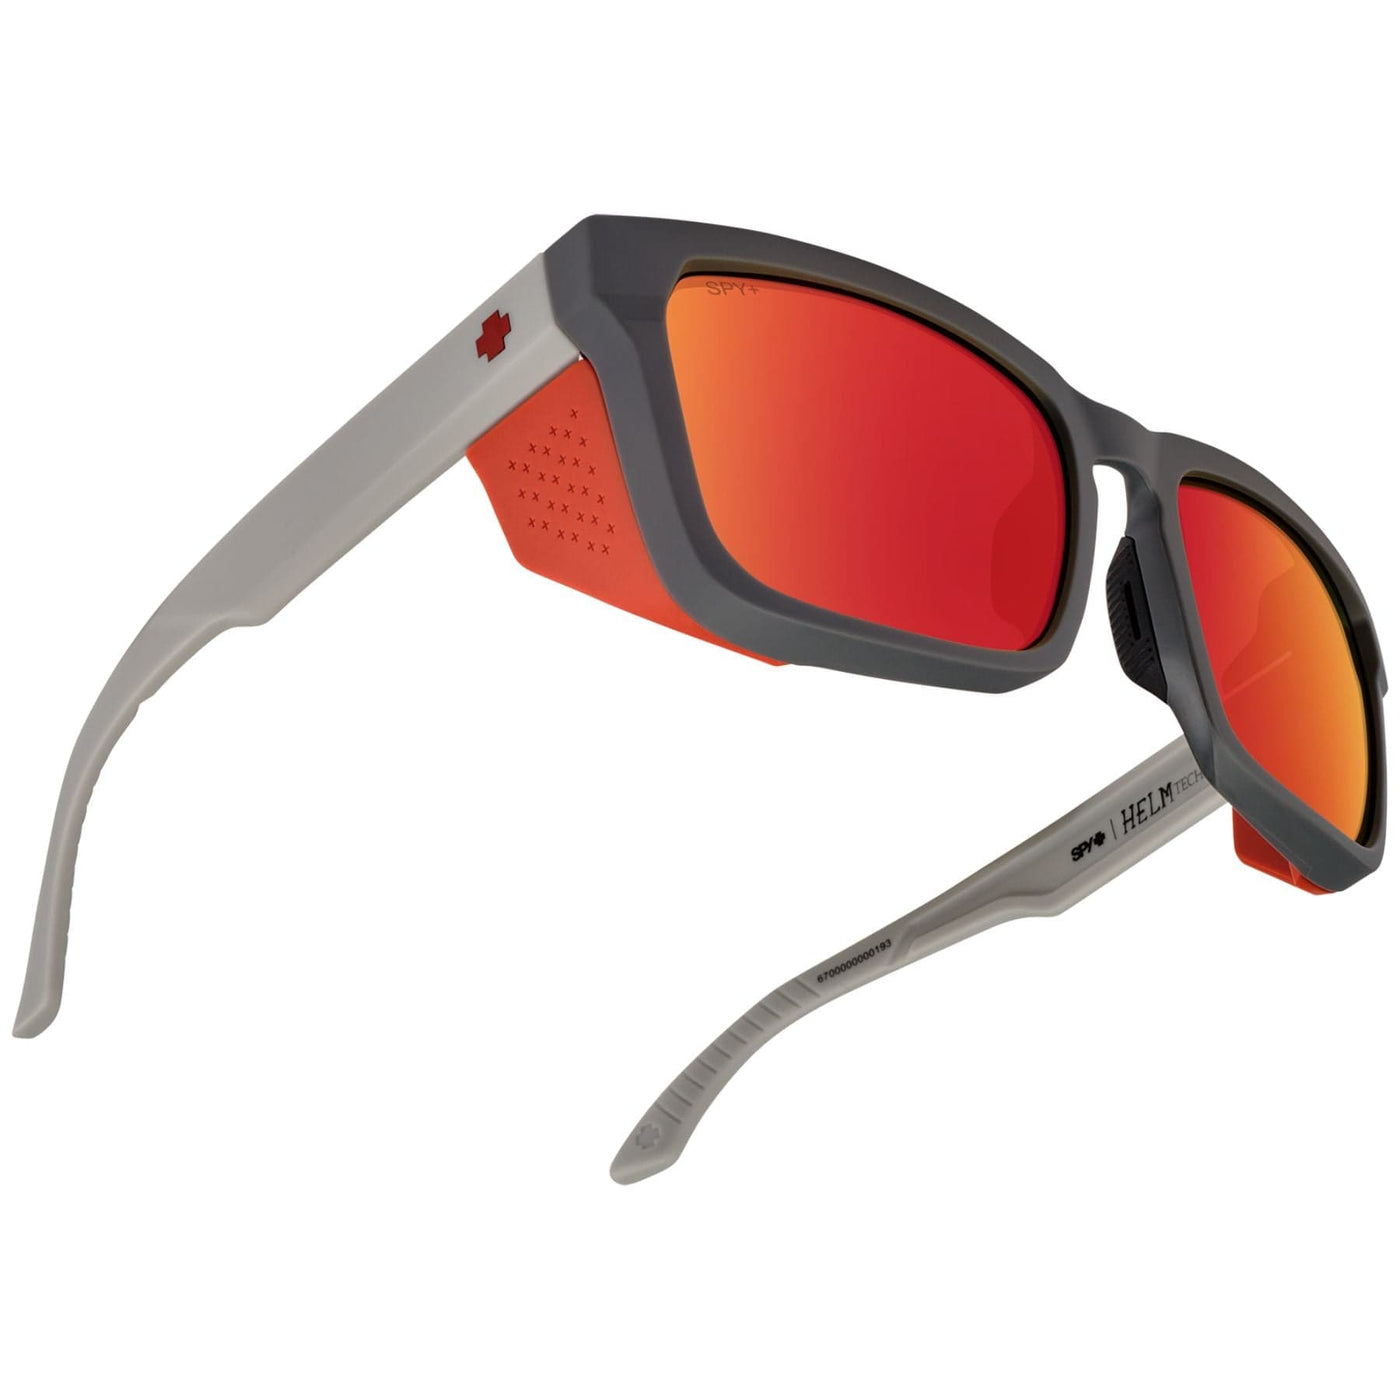 SPY HELM TECH Sunglasses, Happy Lens - Red 8Lines Shop - Fast Shipping